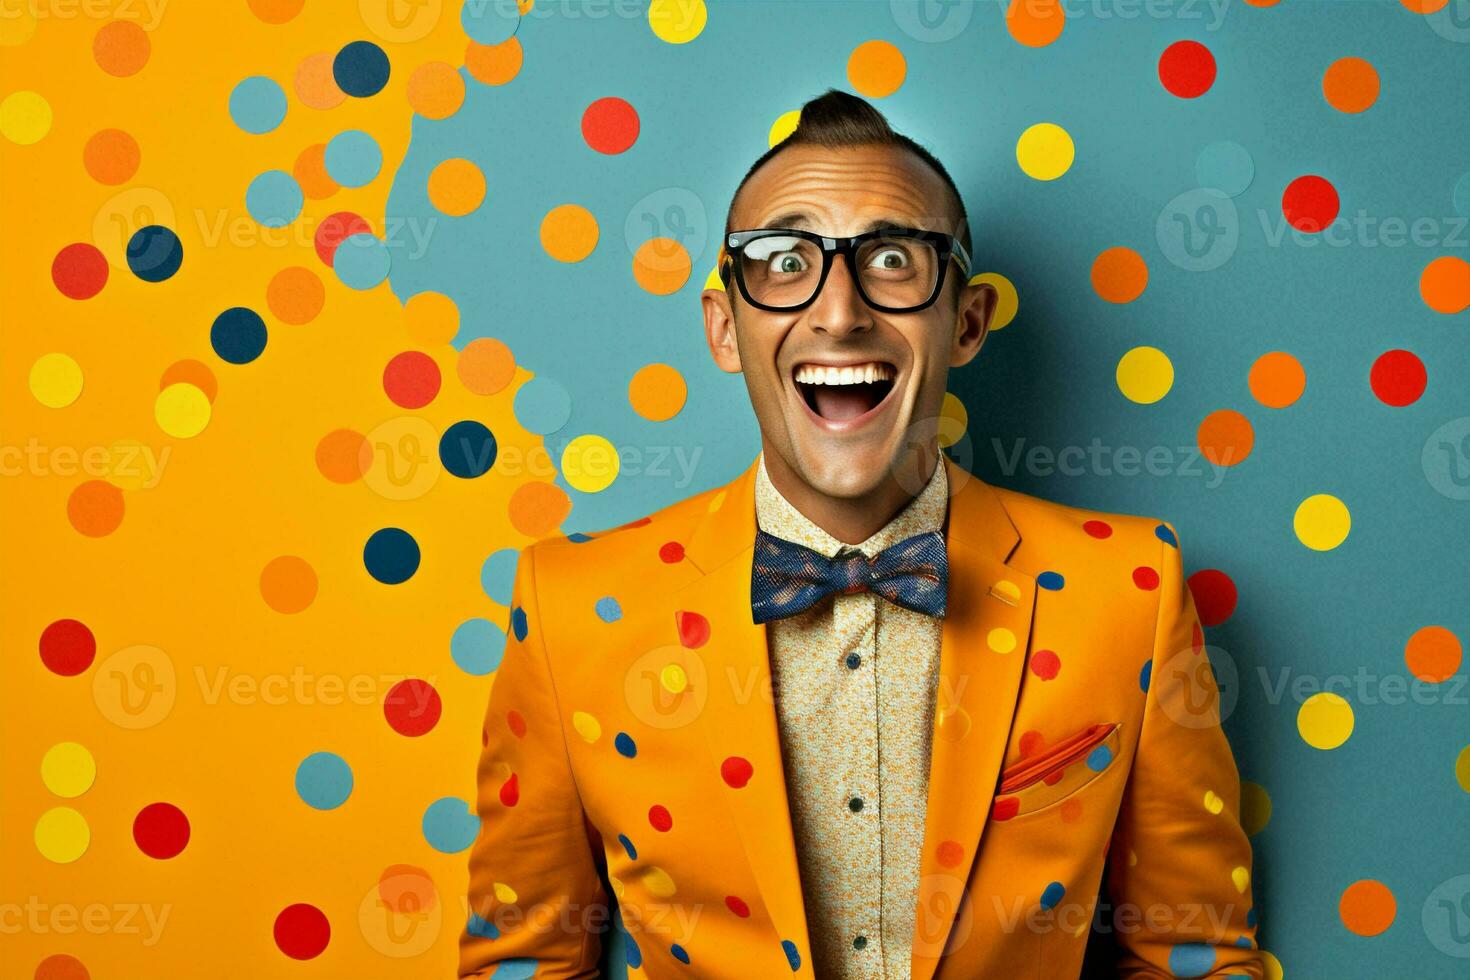 Man style guy hipster crazy person retro concept fashion background dots caucasian polka trendy smiling photo